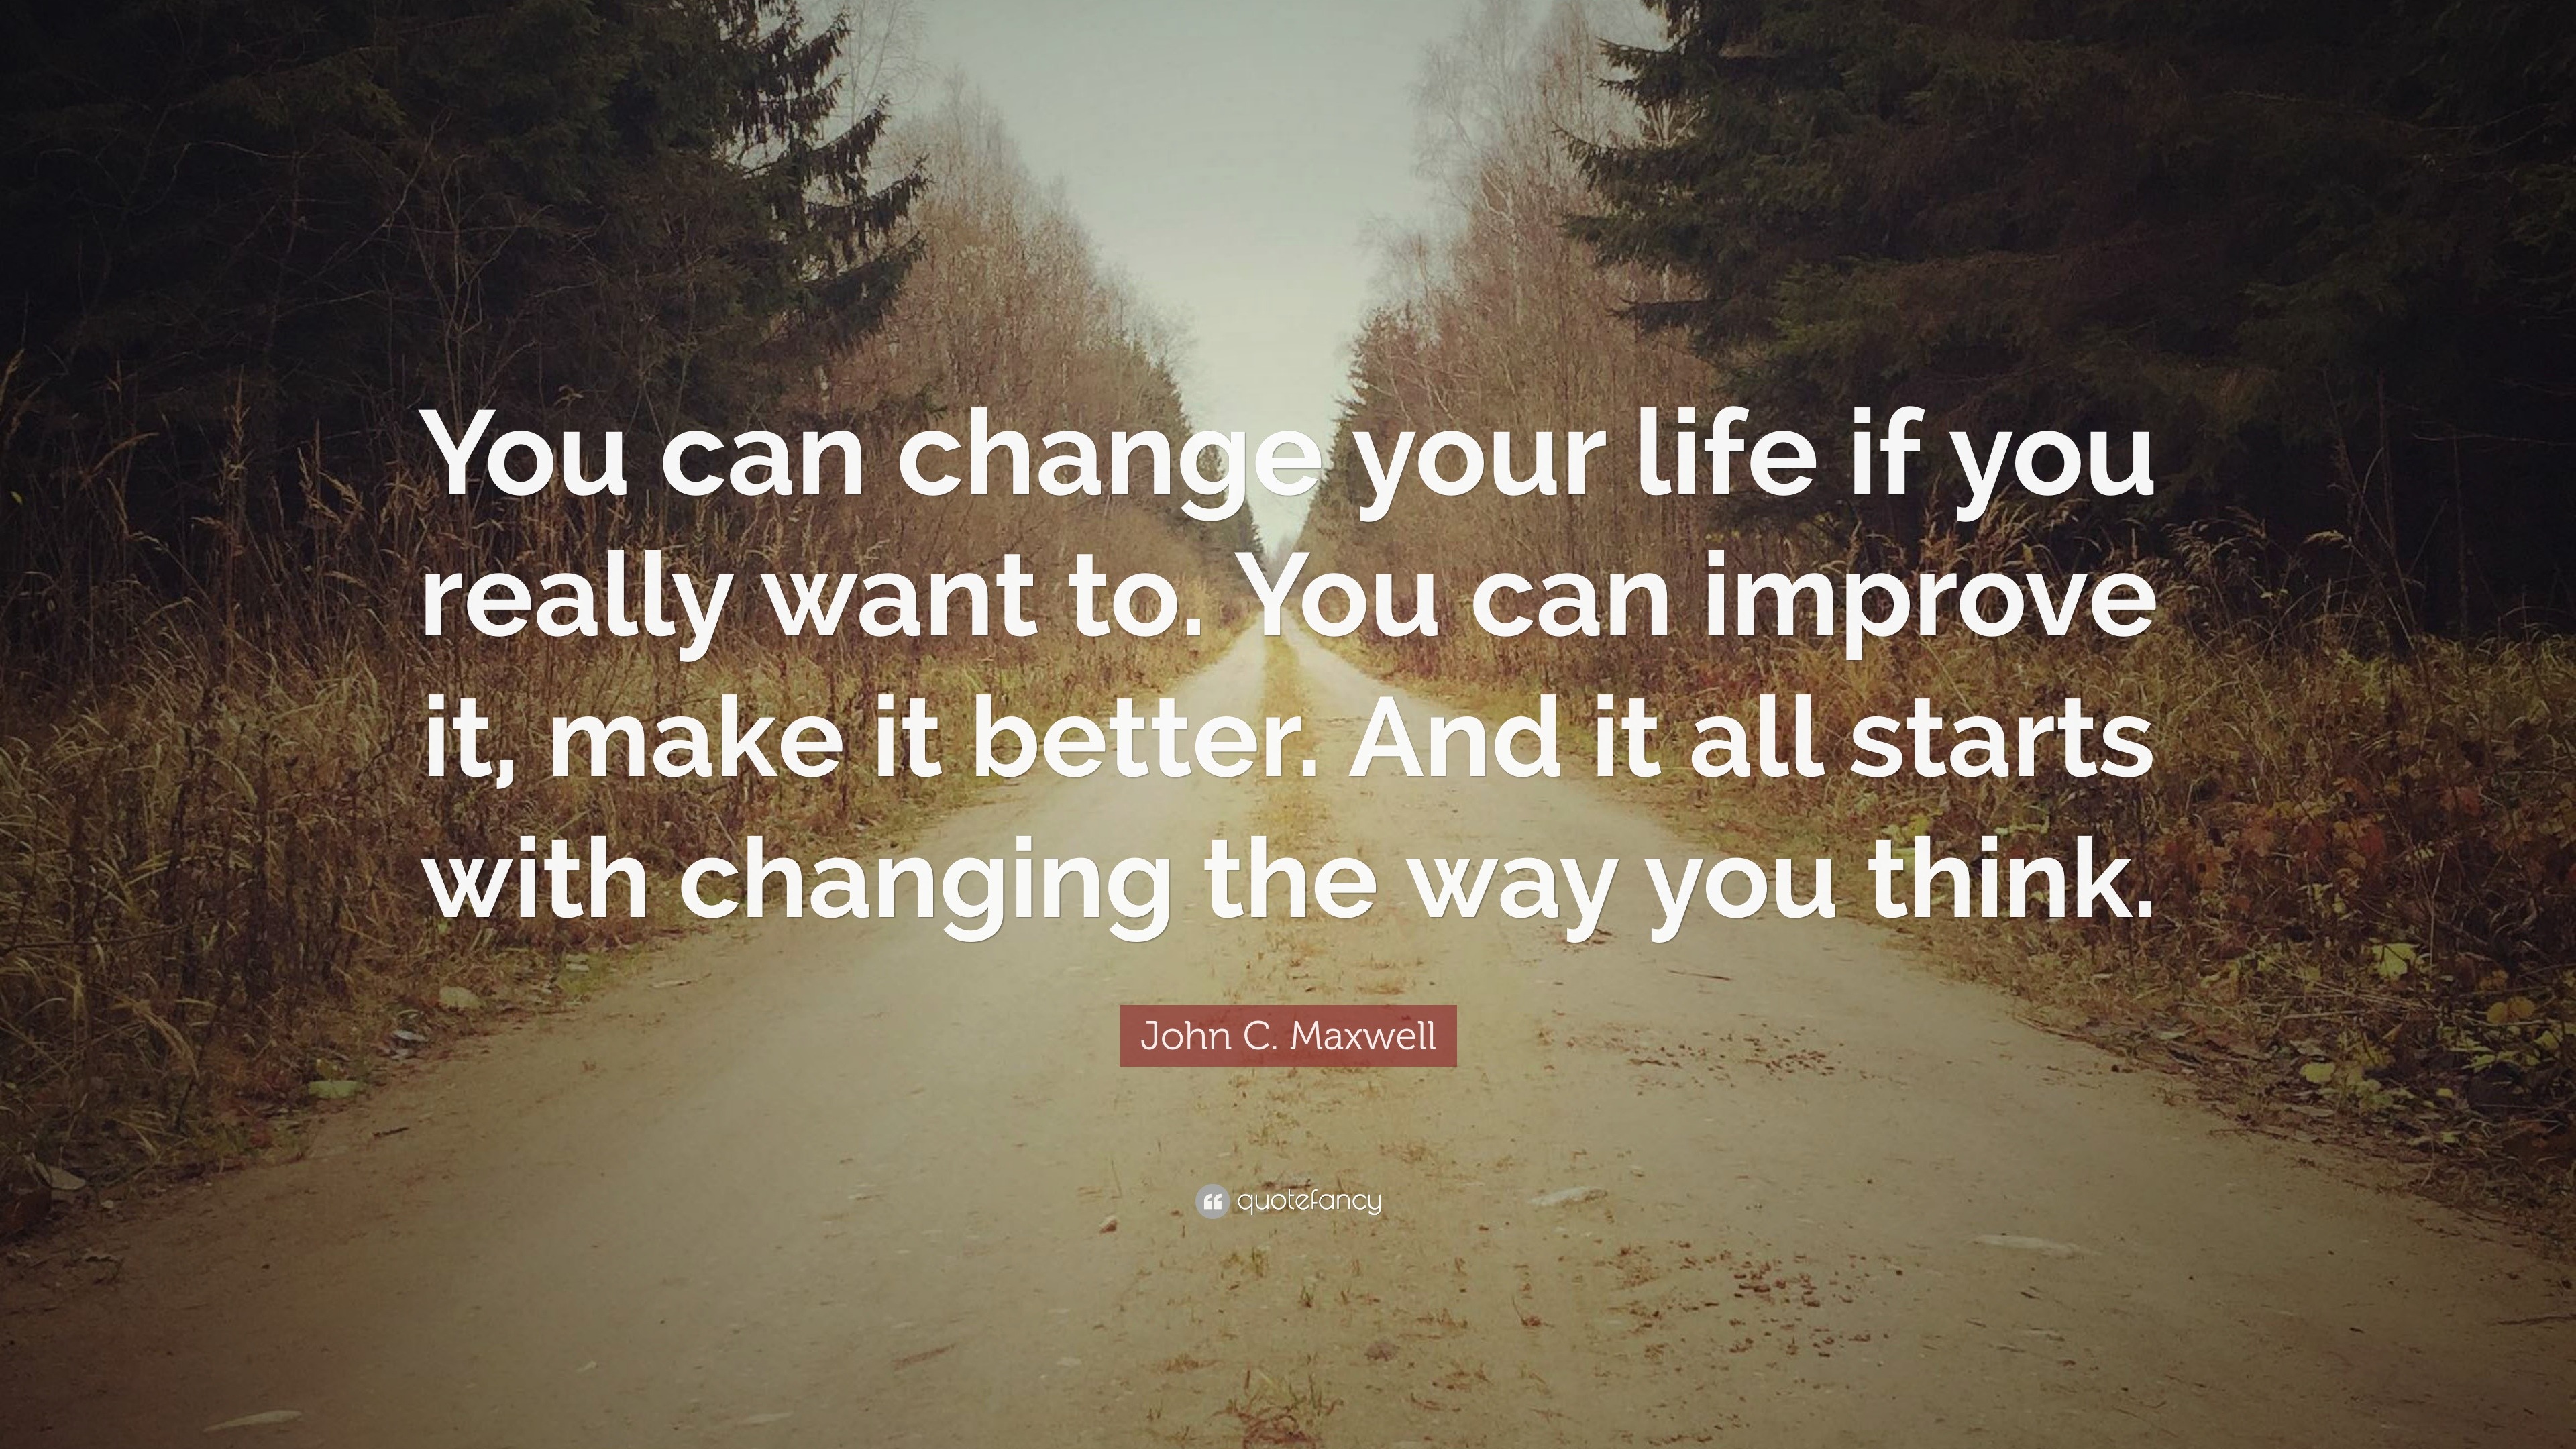 John C. Maxwell Quote: “You can change your life if you really want to ...